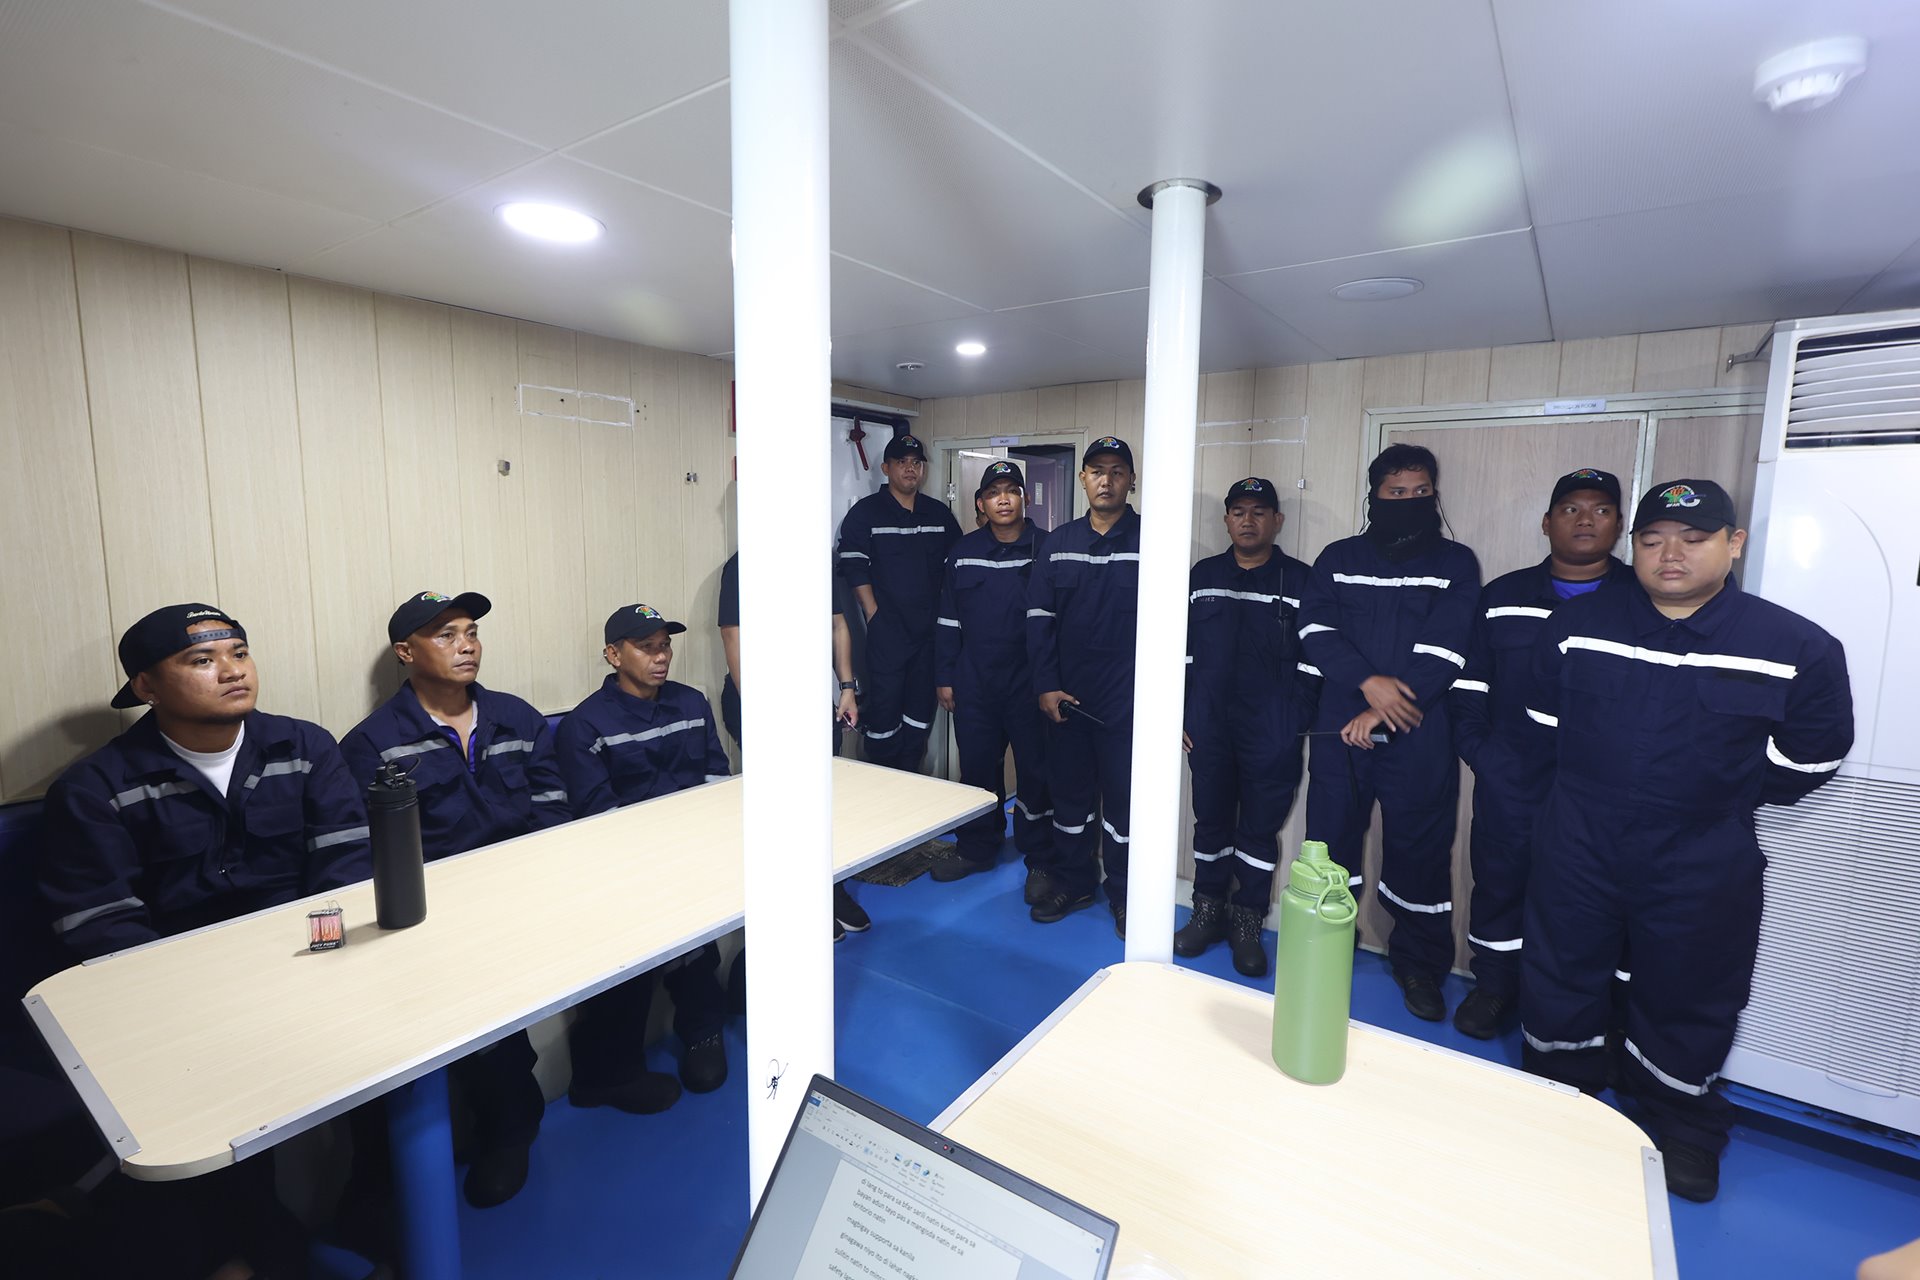 The crew of a Bureau of Fisheries and Aquatic Resources vessel gather for a final briefing in the province of Bataan, Philippines, an hour before heading to deliver supplies of oil and food to Filipino fishermen working near Scarborough Shoal.